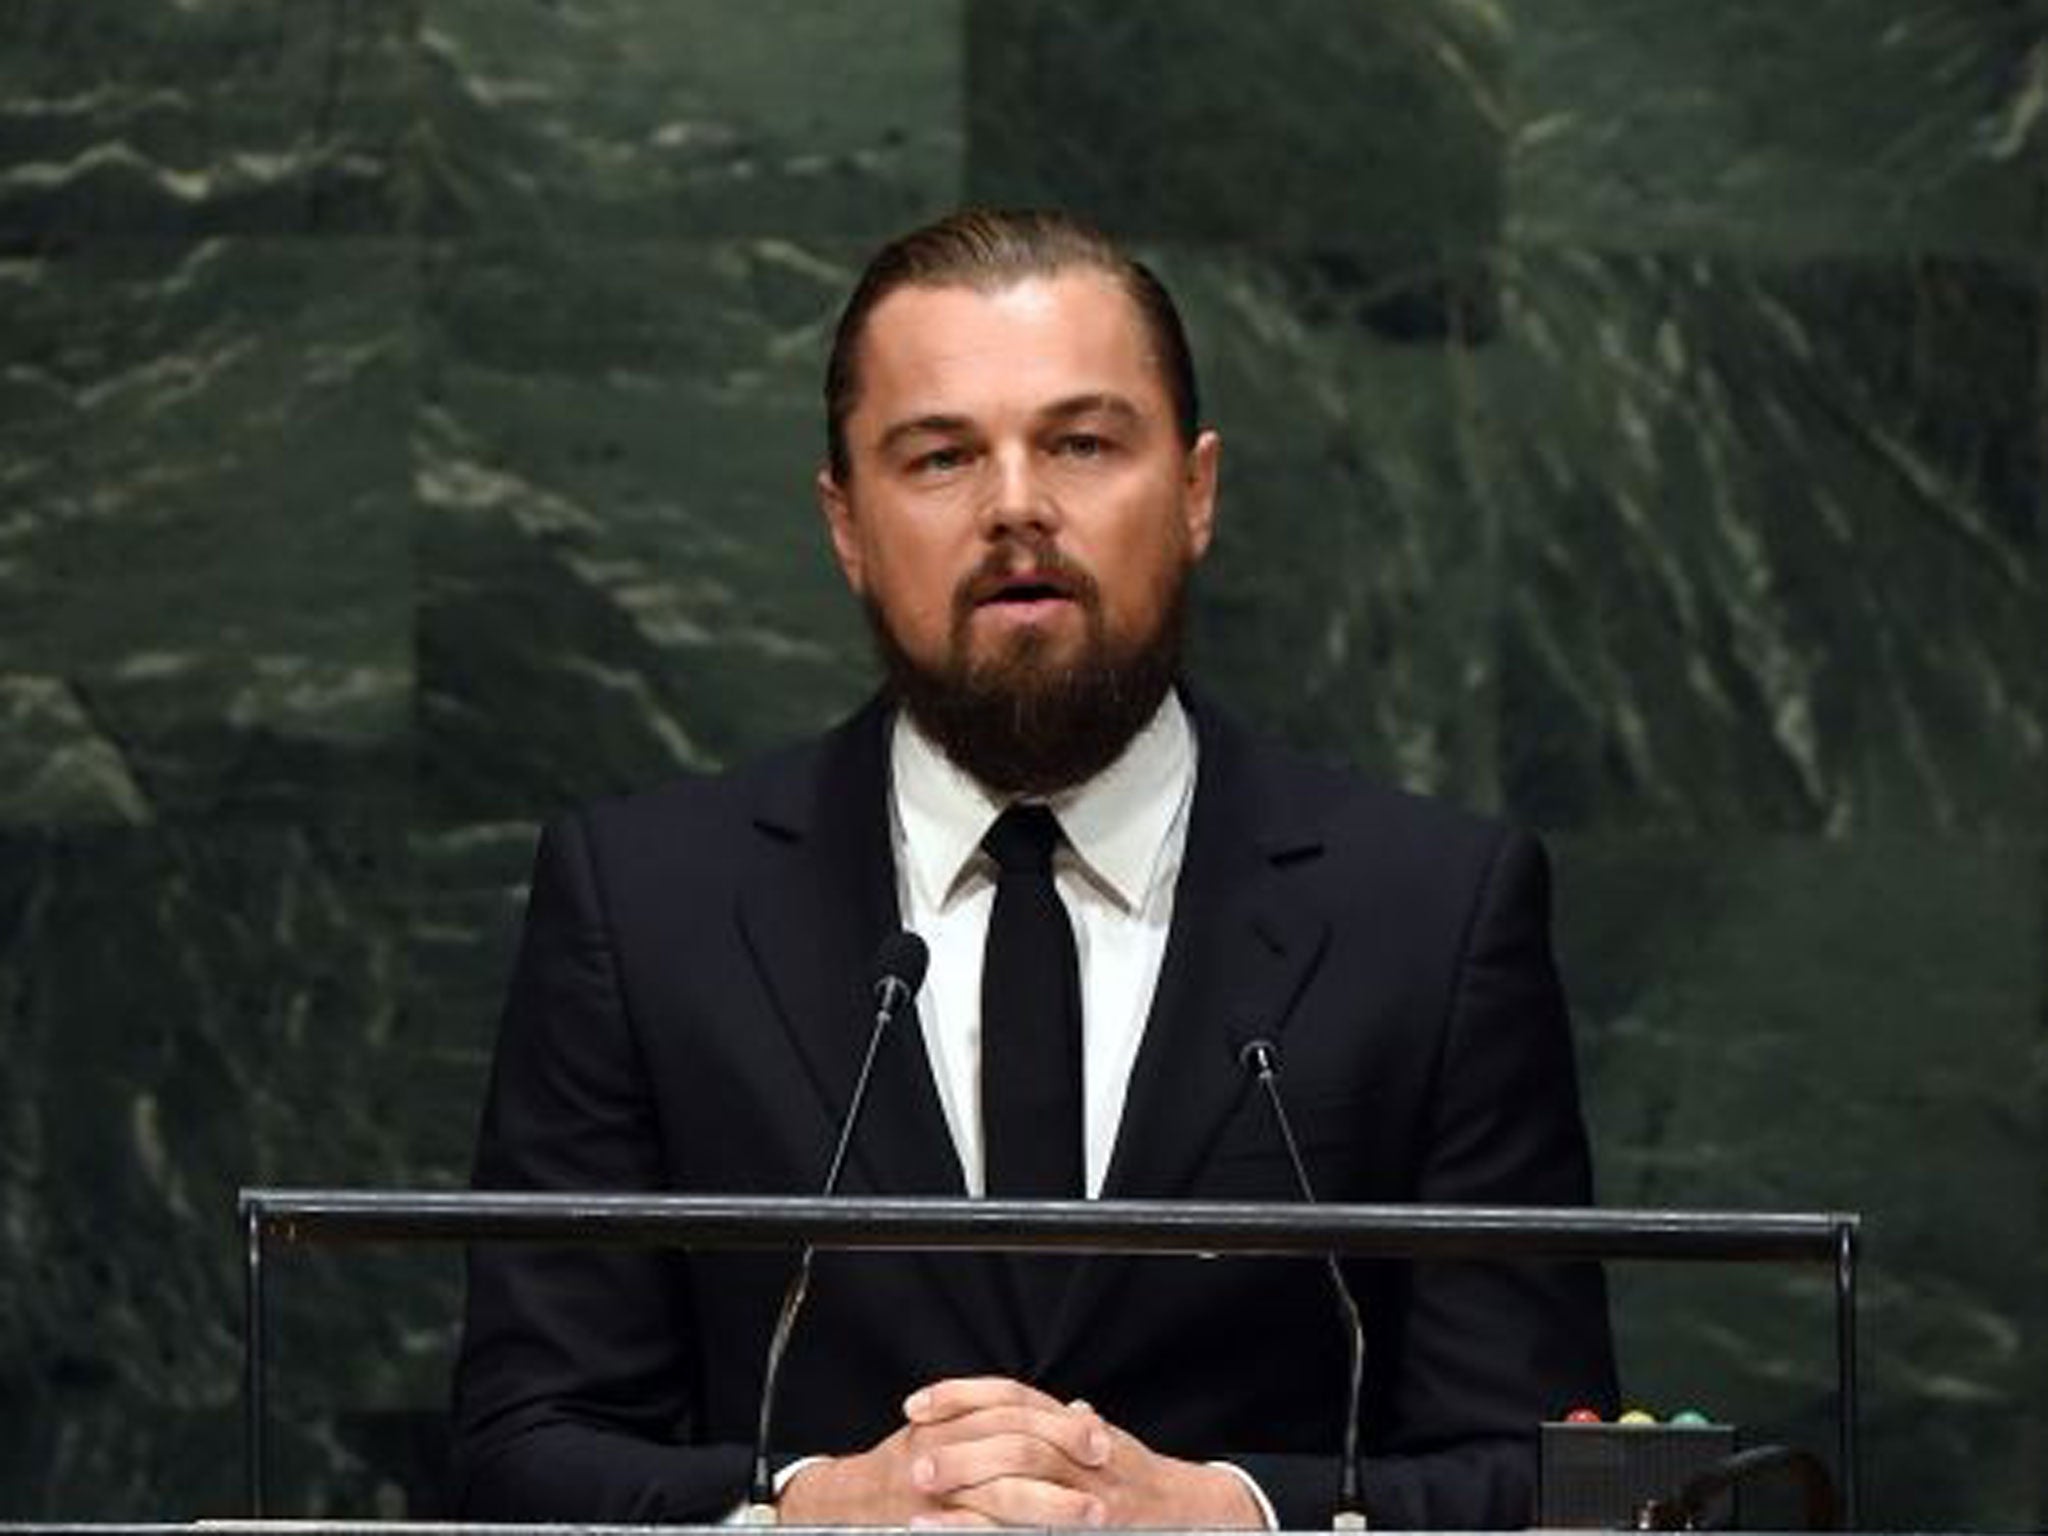 Leonardo DiCaprio, actor and UN Messenger of Peace speaks during the opening session of the Climate Change Summit at the United Nations in New York September 23, 2014, in New York.